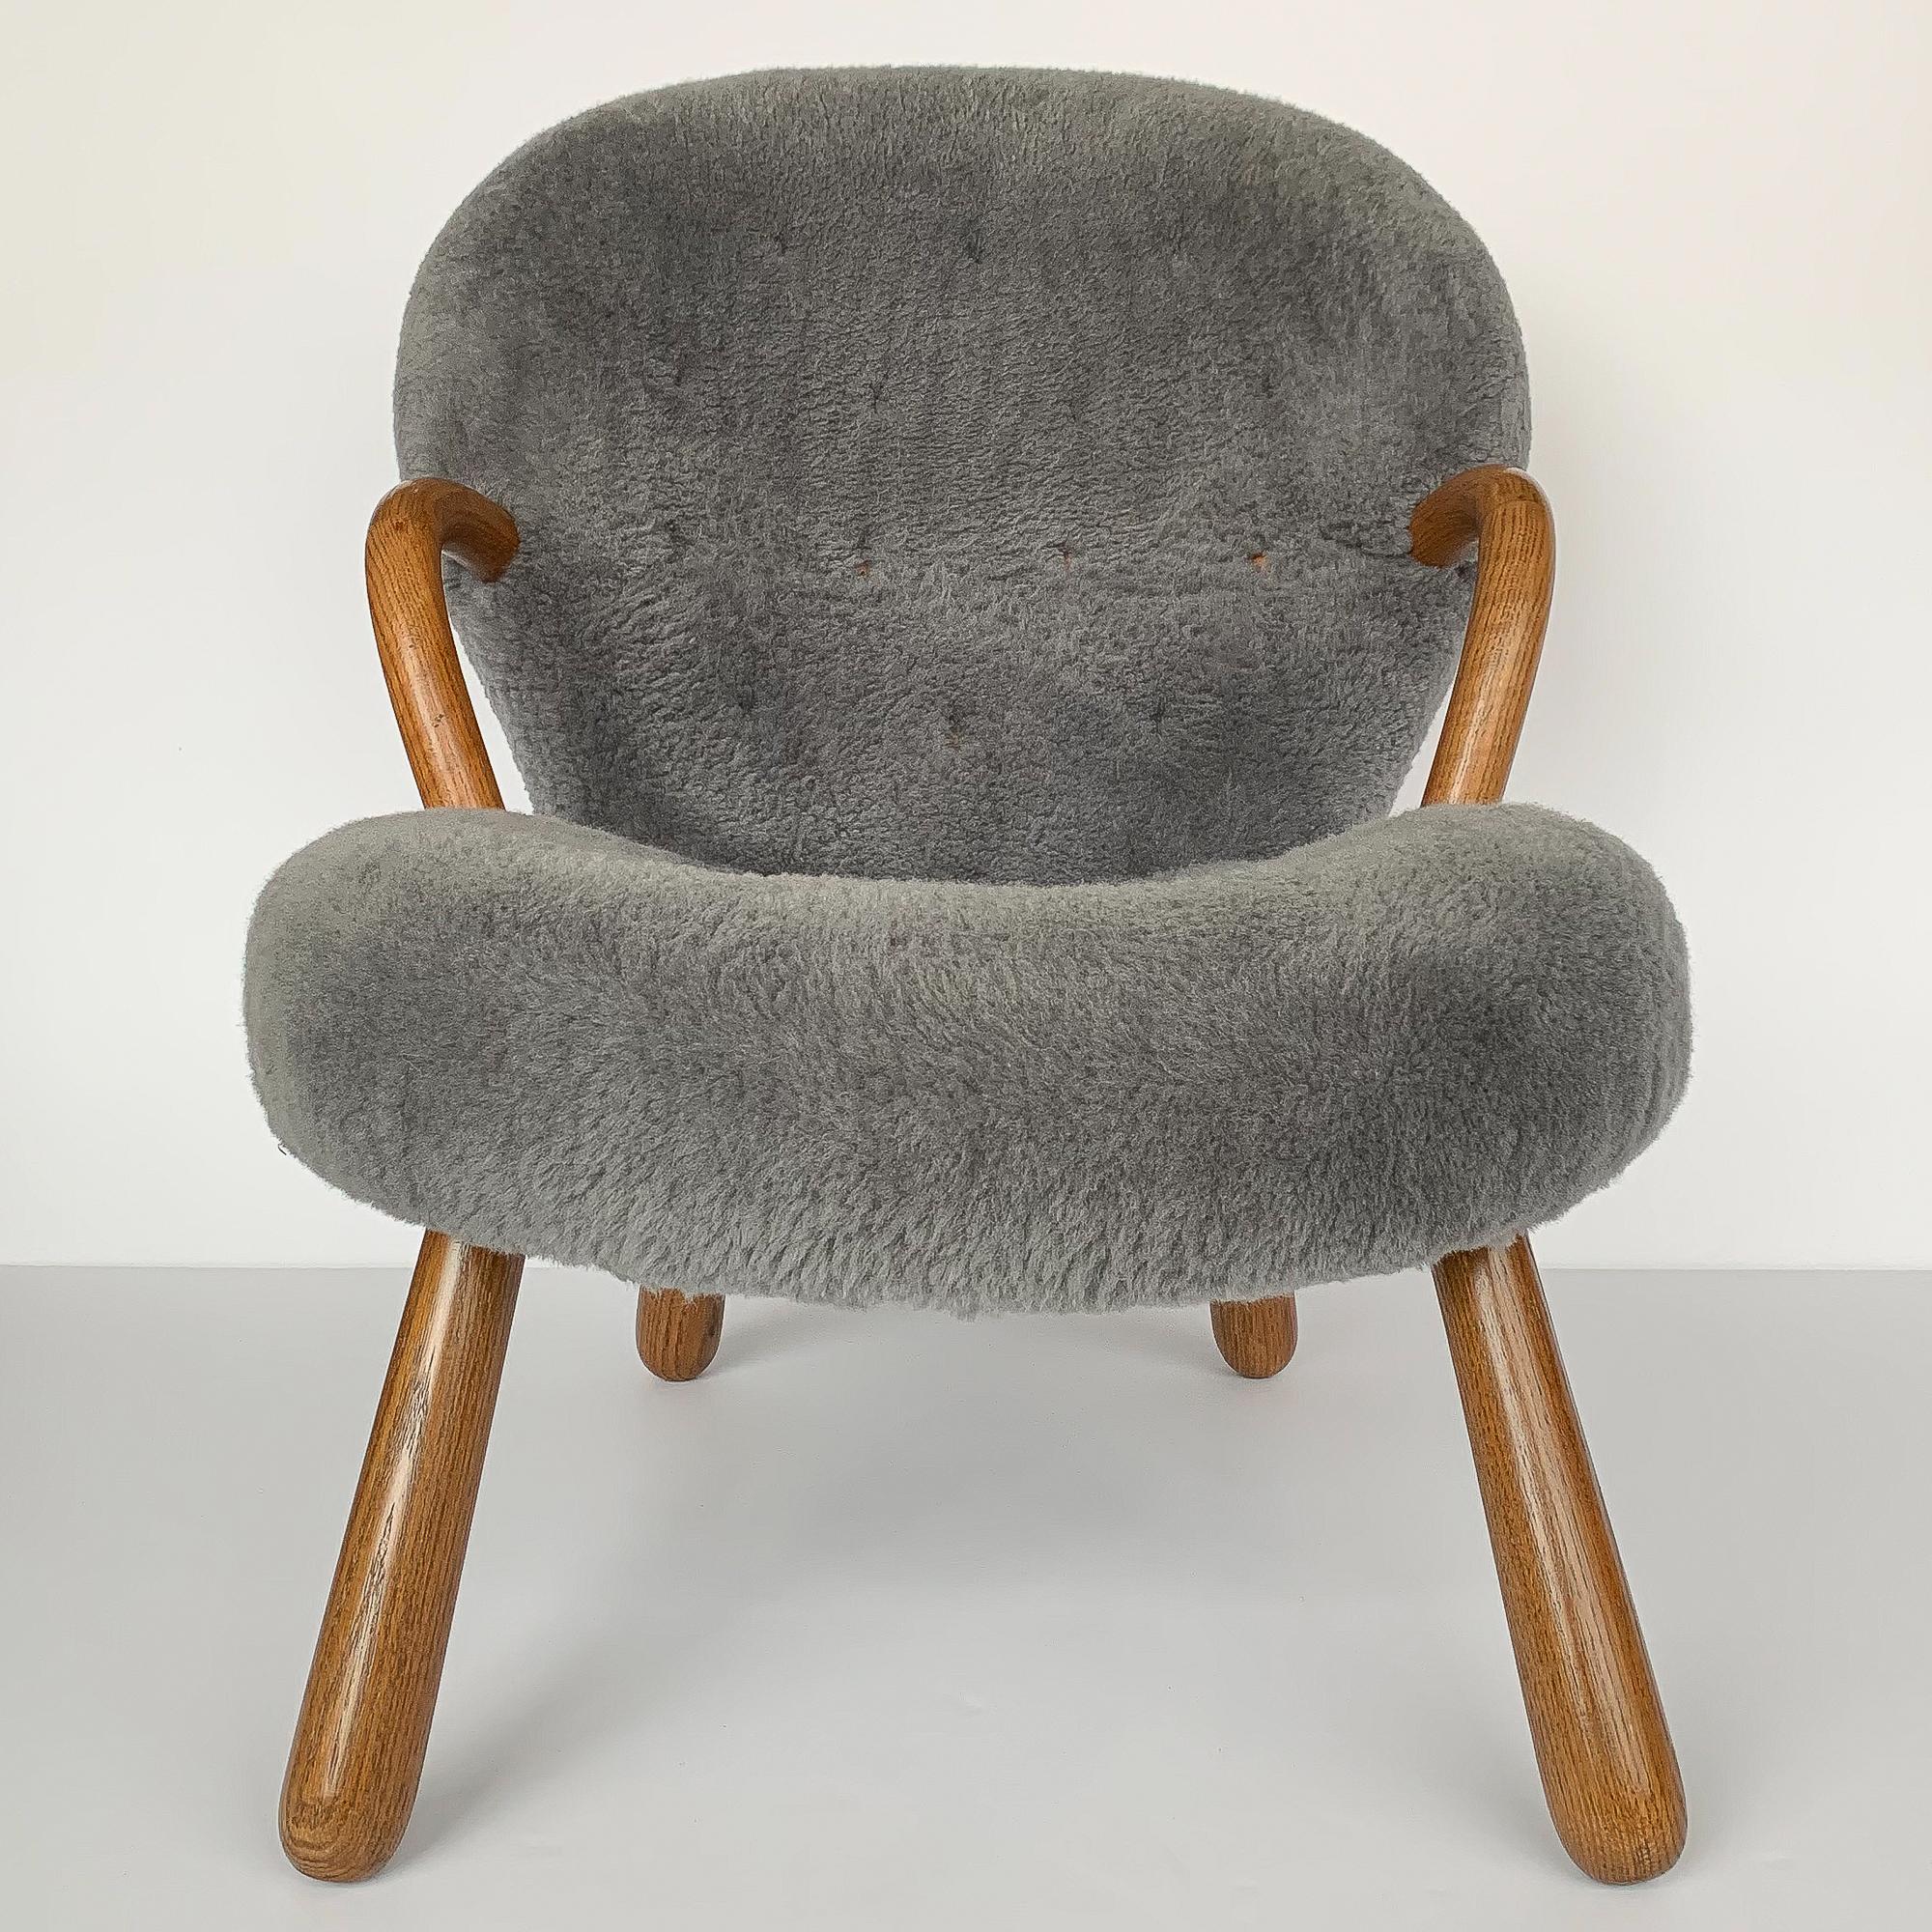 Danish Pair of Philip Arctander Lounge Chairs for Paustian